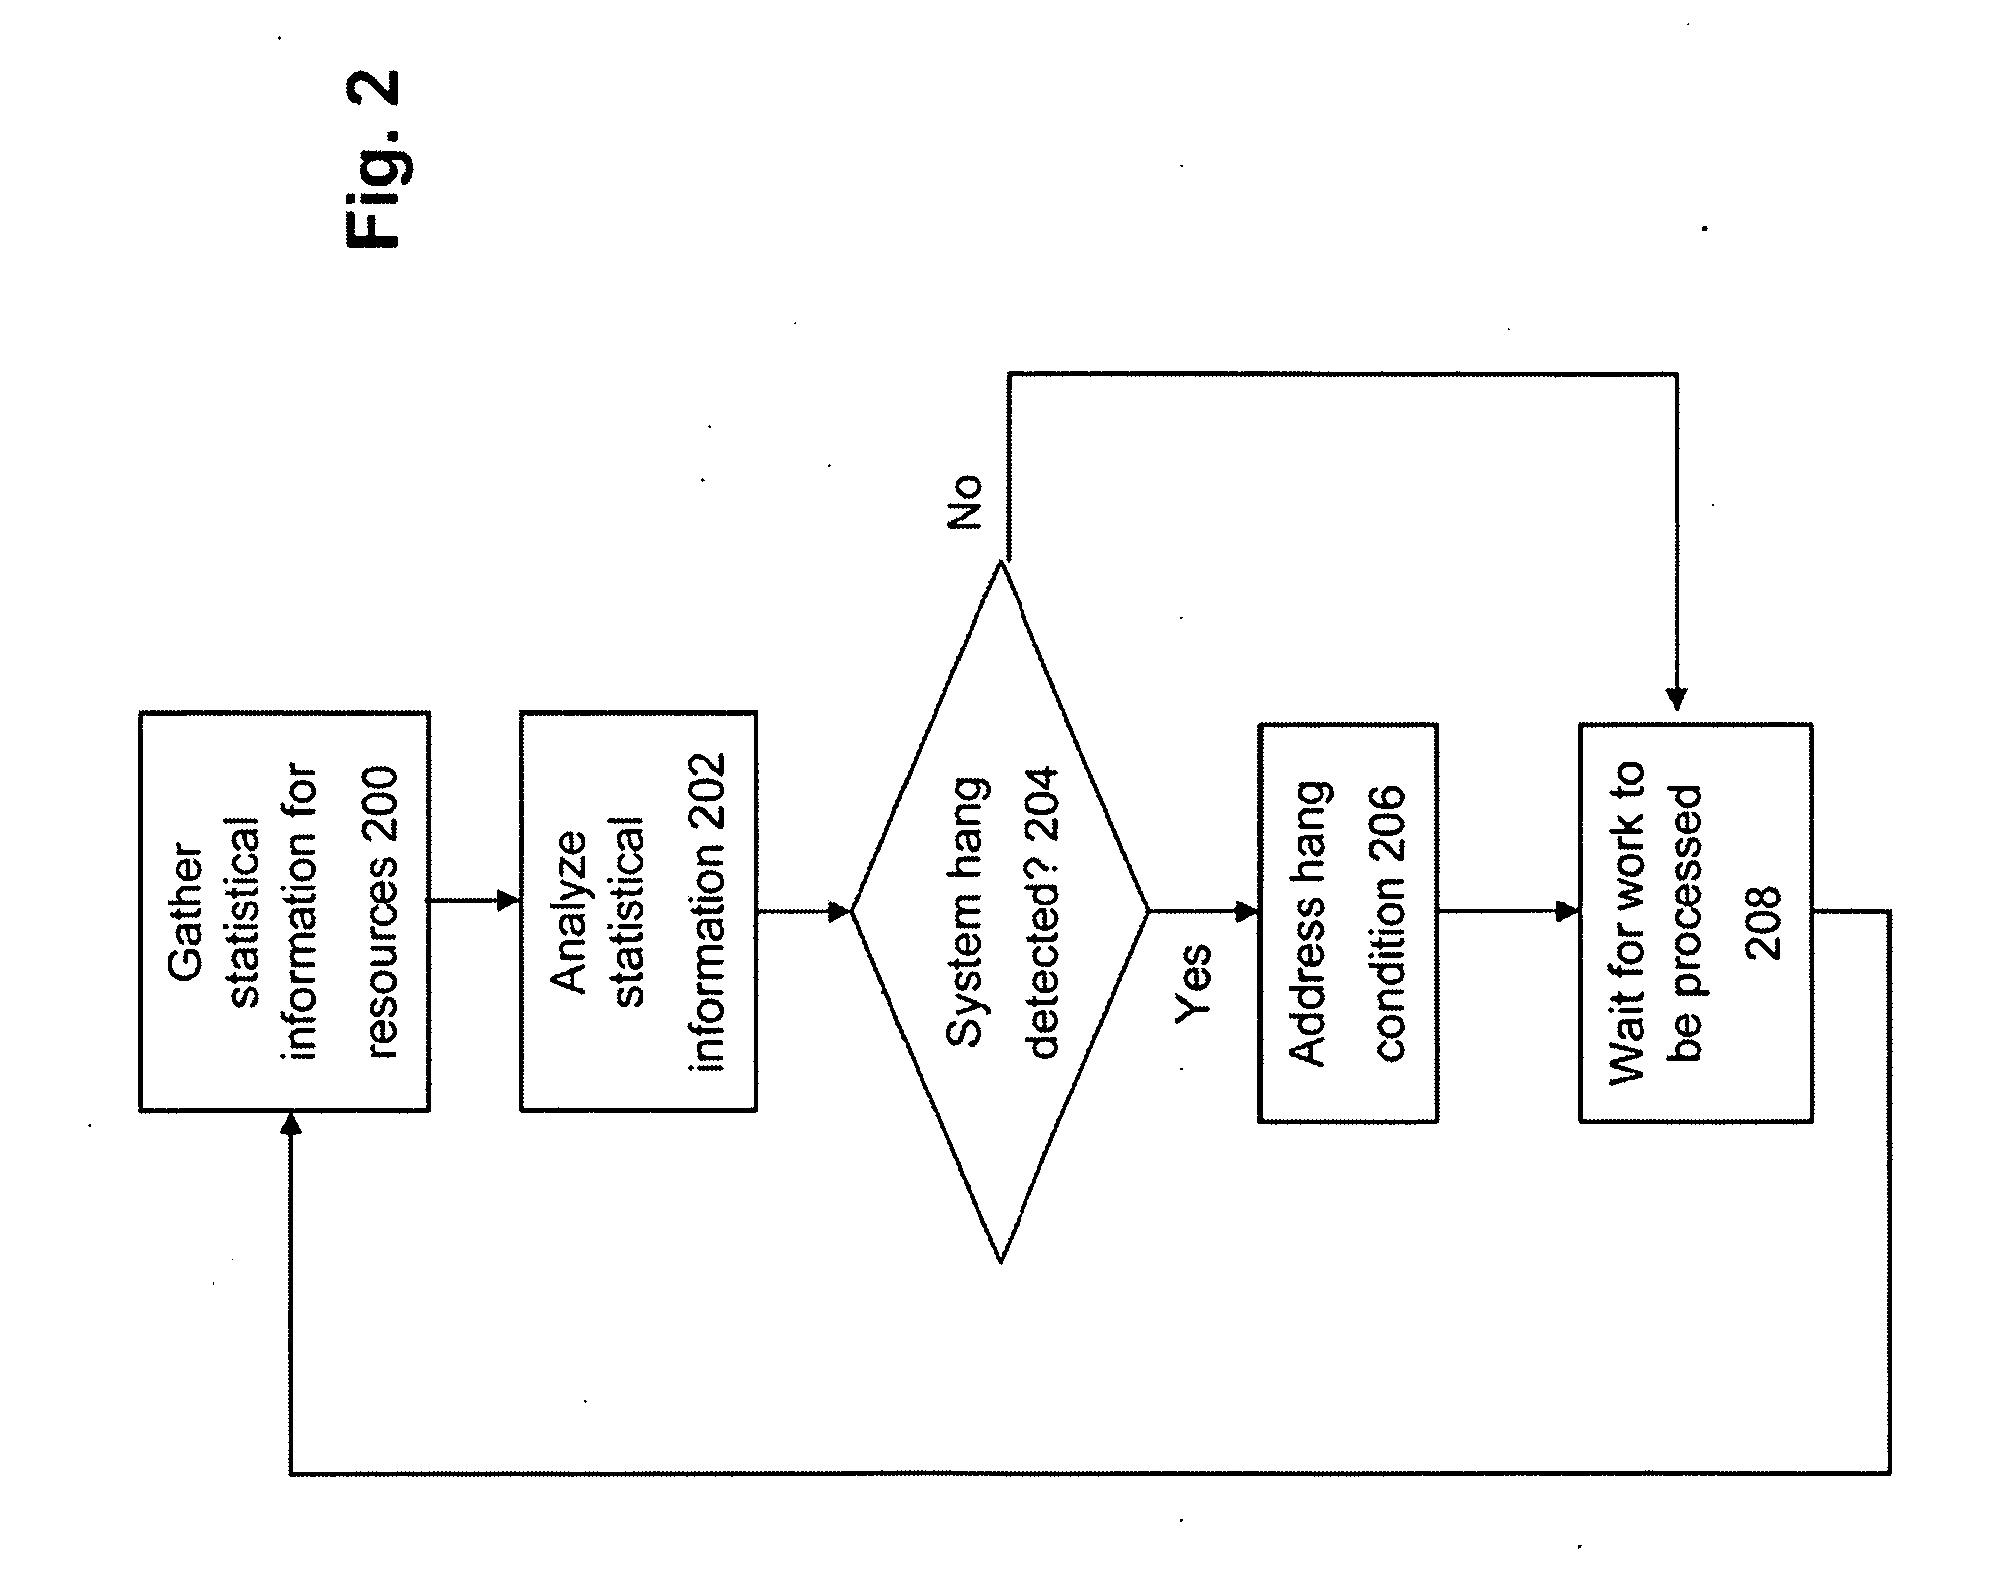 Method, system, and computer program product for determining a hang state and distinguishing a hang state from an idle state